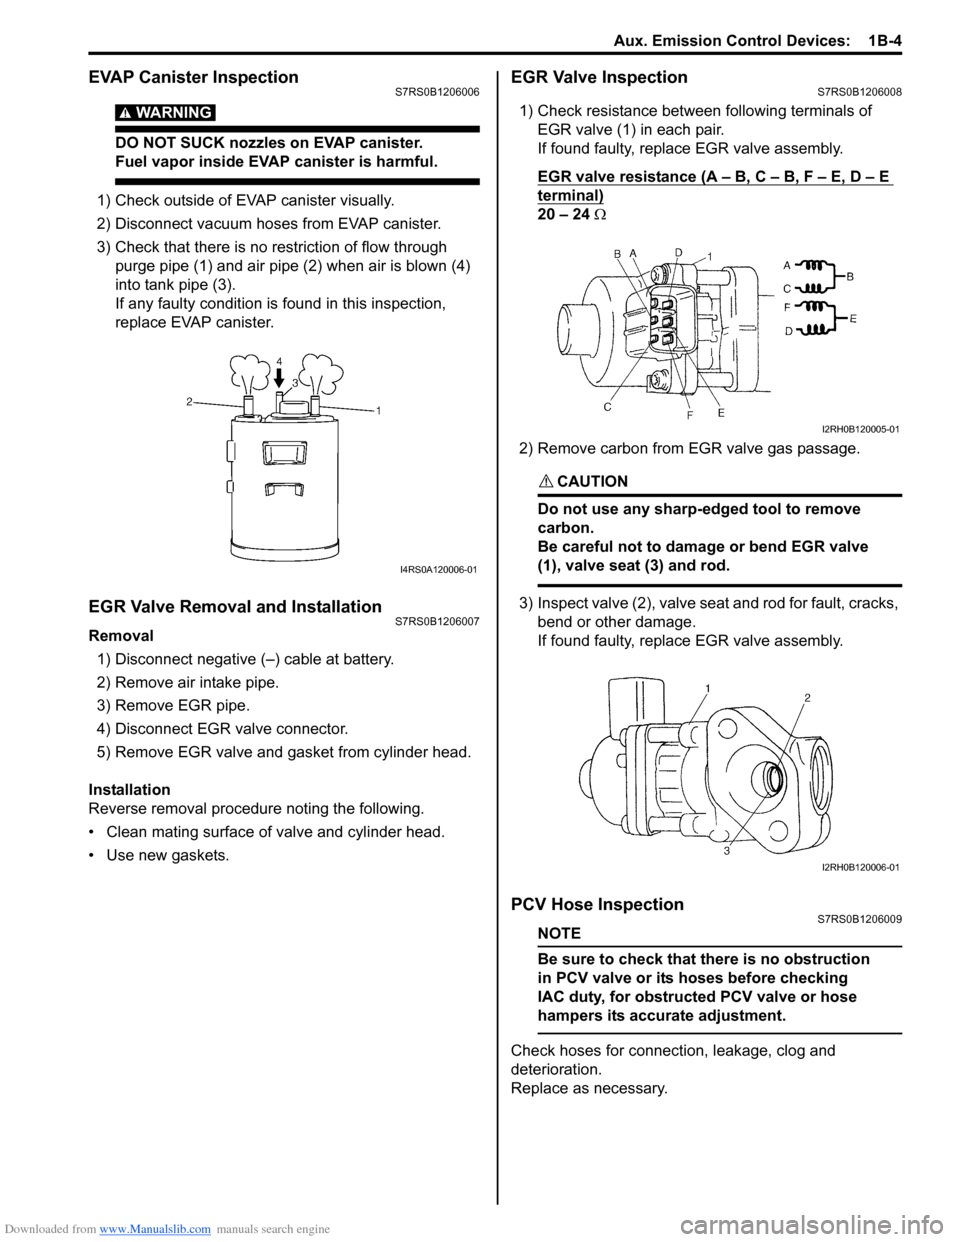 SUZUKI SWIFT 2005 2.G Service Workshop Manual Downloaded from www.Manualslib.com manuals search engine Aux. Emission Control Devices:  1B-4
EVAP Canister InspectionS7RS0B1206006
WARNING! 
DO NOT SUCK nozzles on EVAP canister. 
Fuel vapor inside E